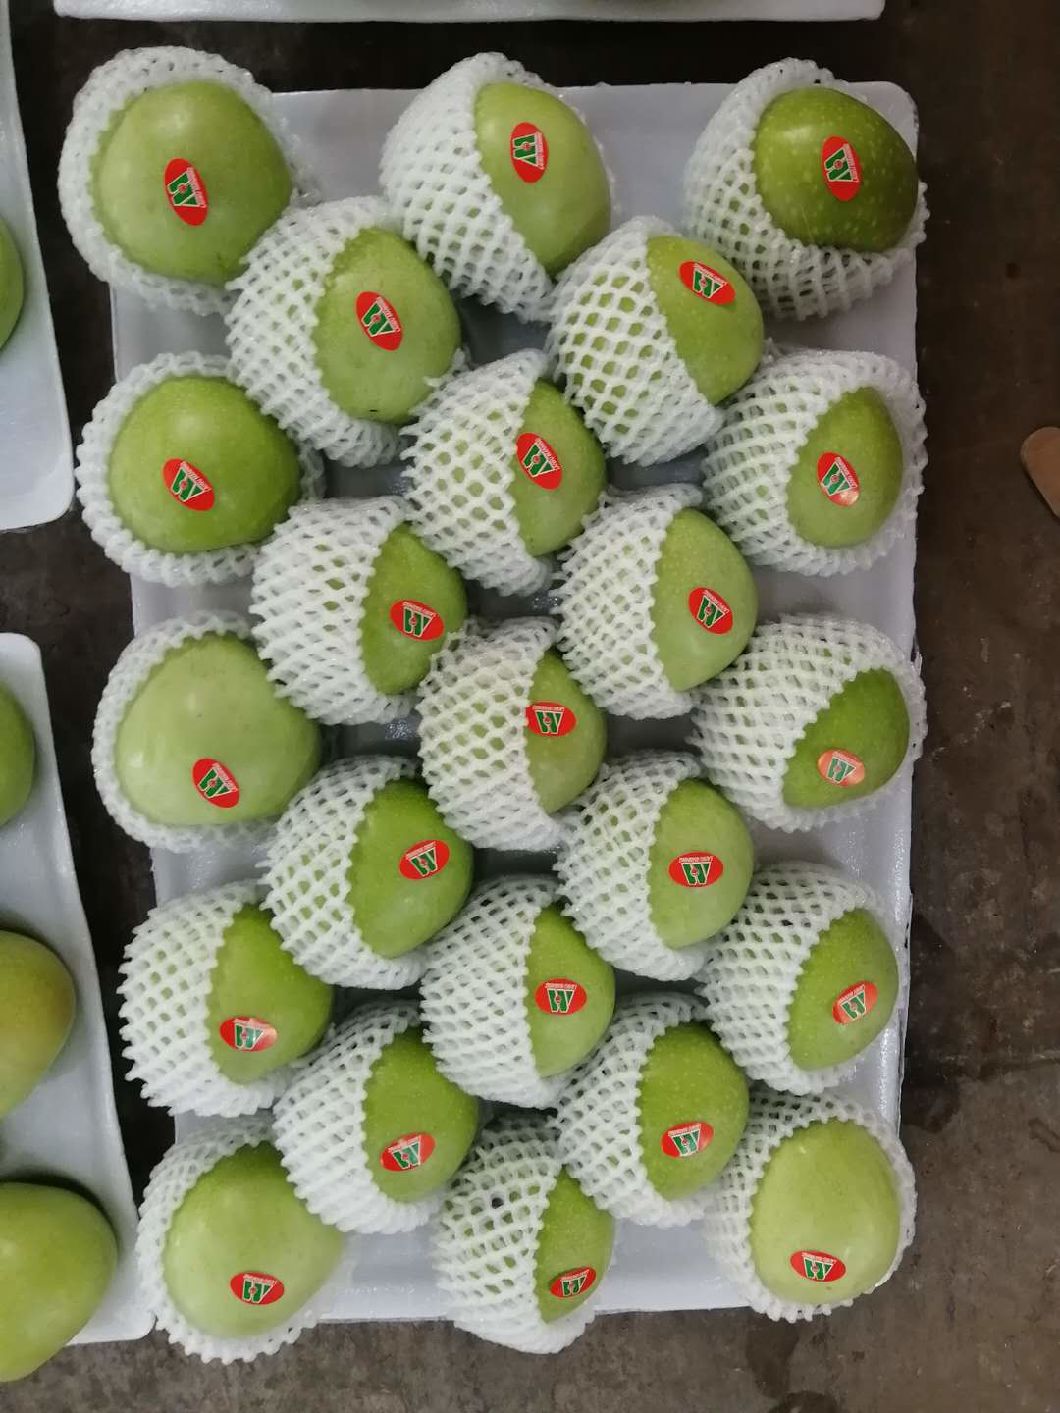 Fresh Apple to Middle East